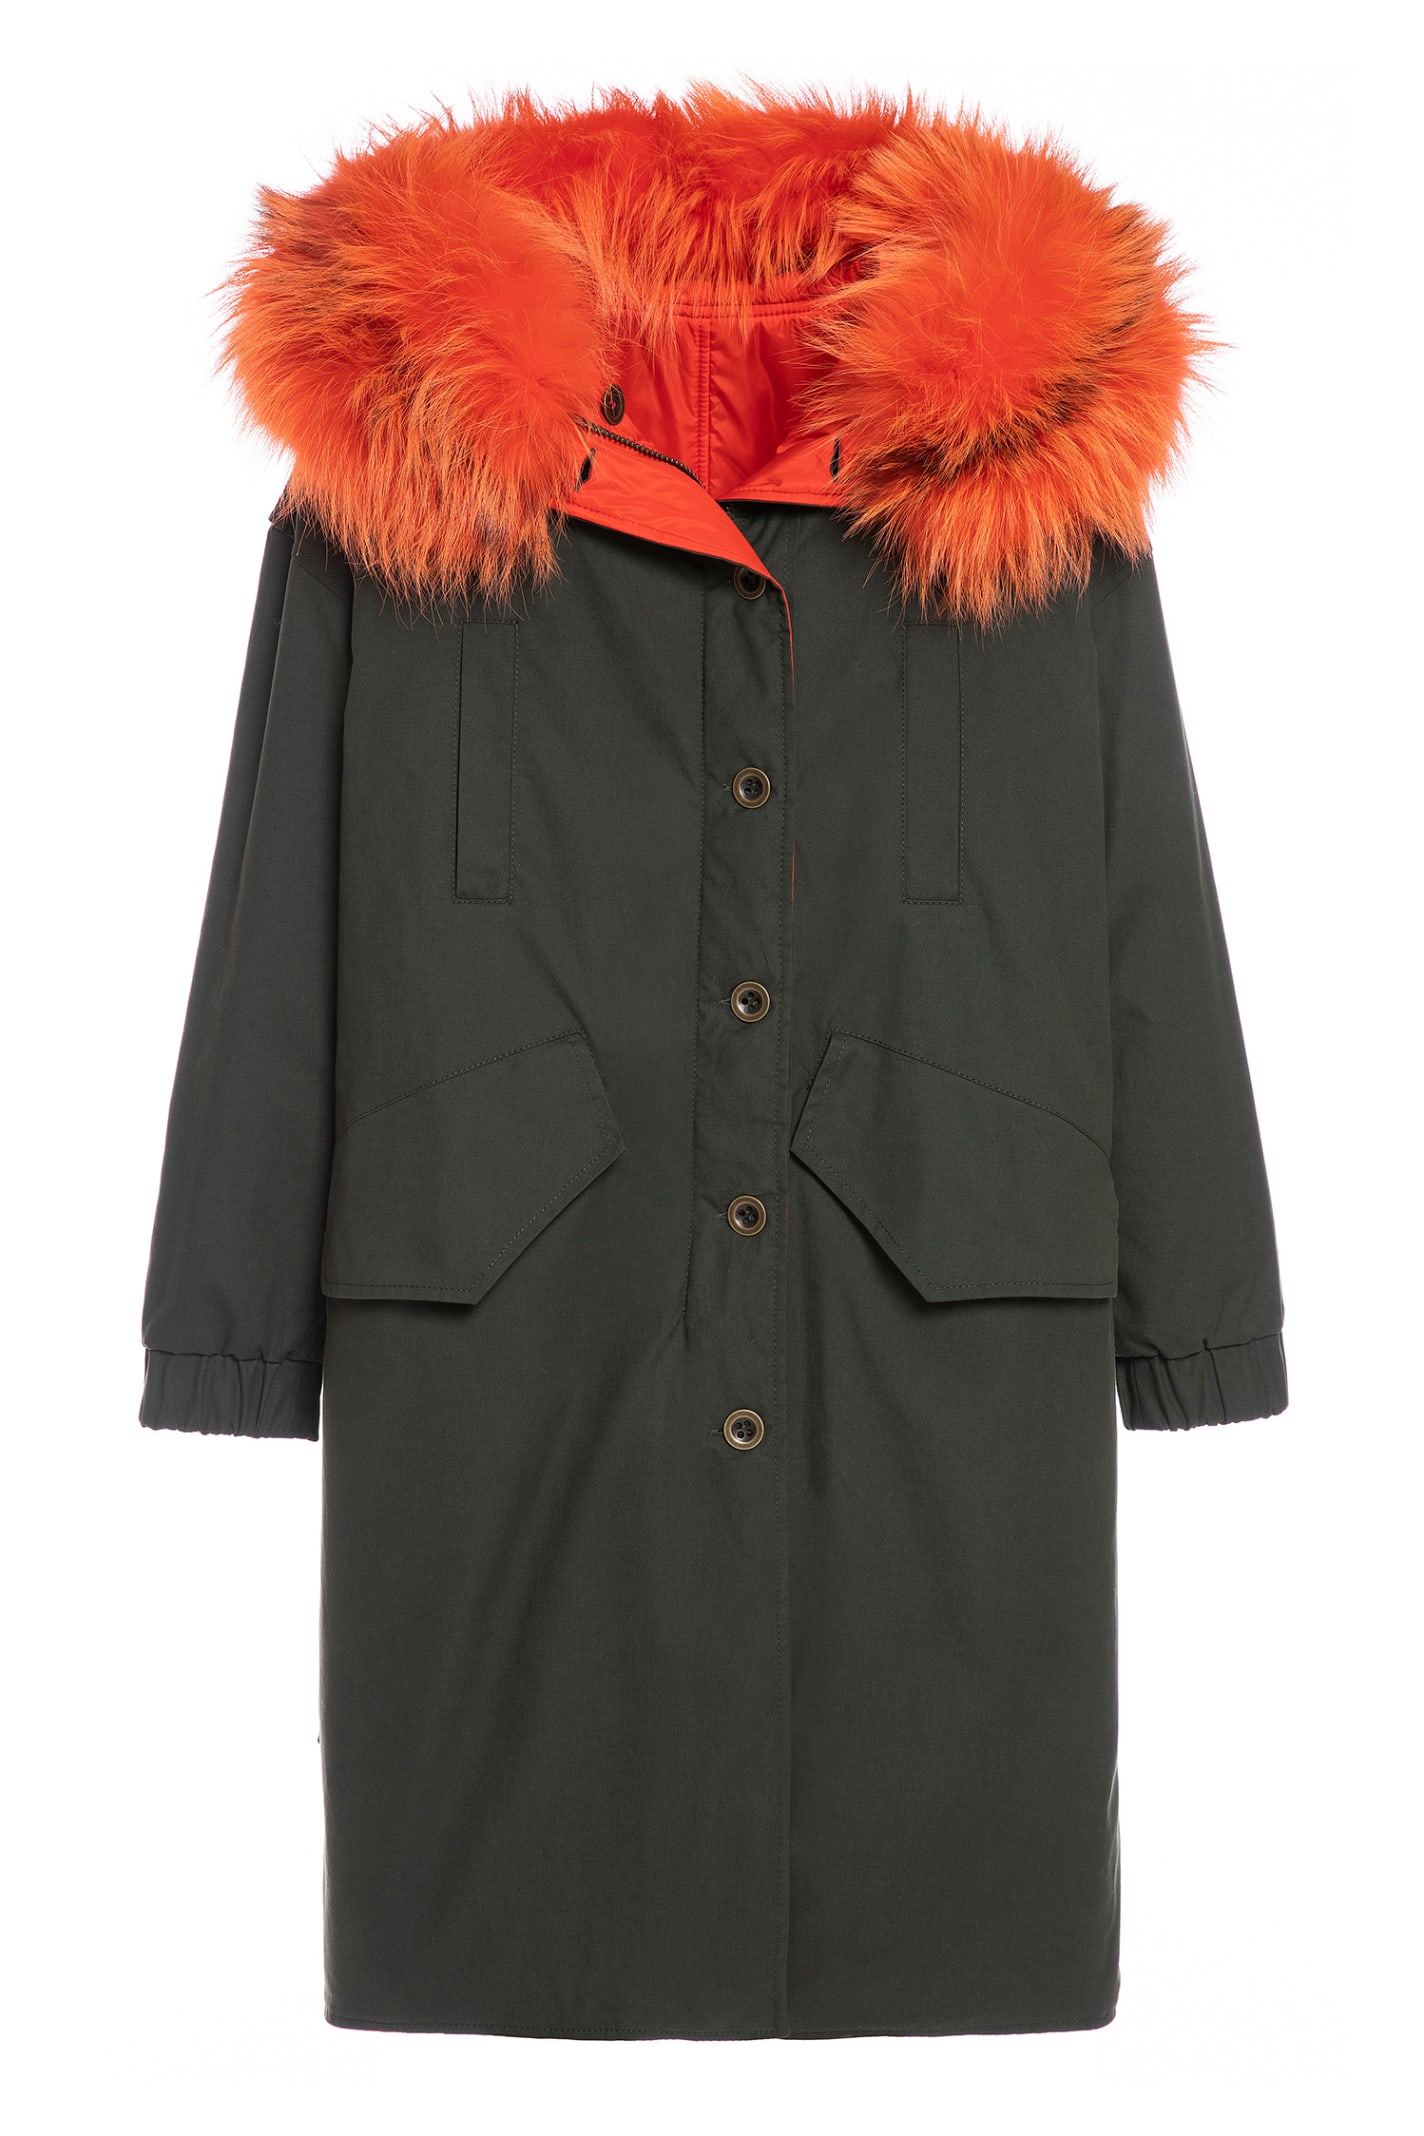 Mr & Mrs Italy Reversible Boxy Parka A-line With Fox Fur